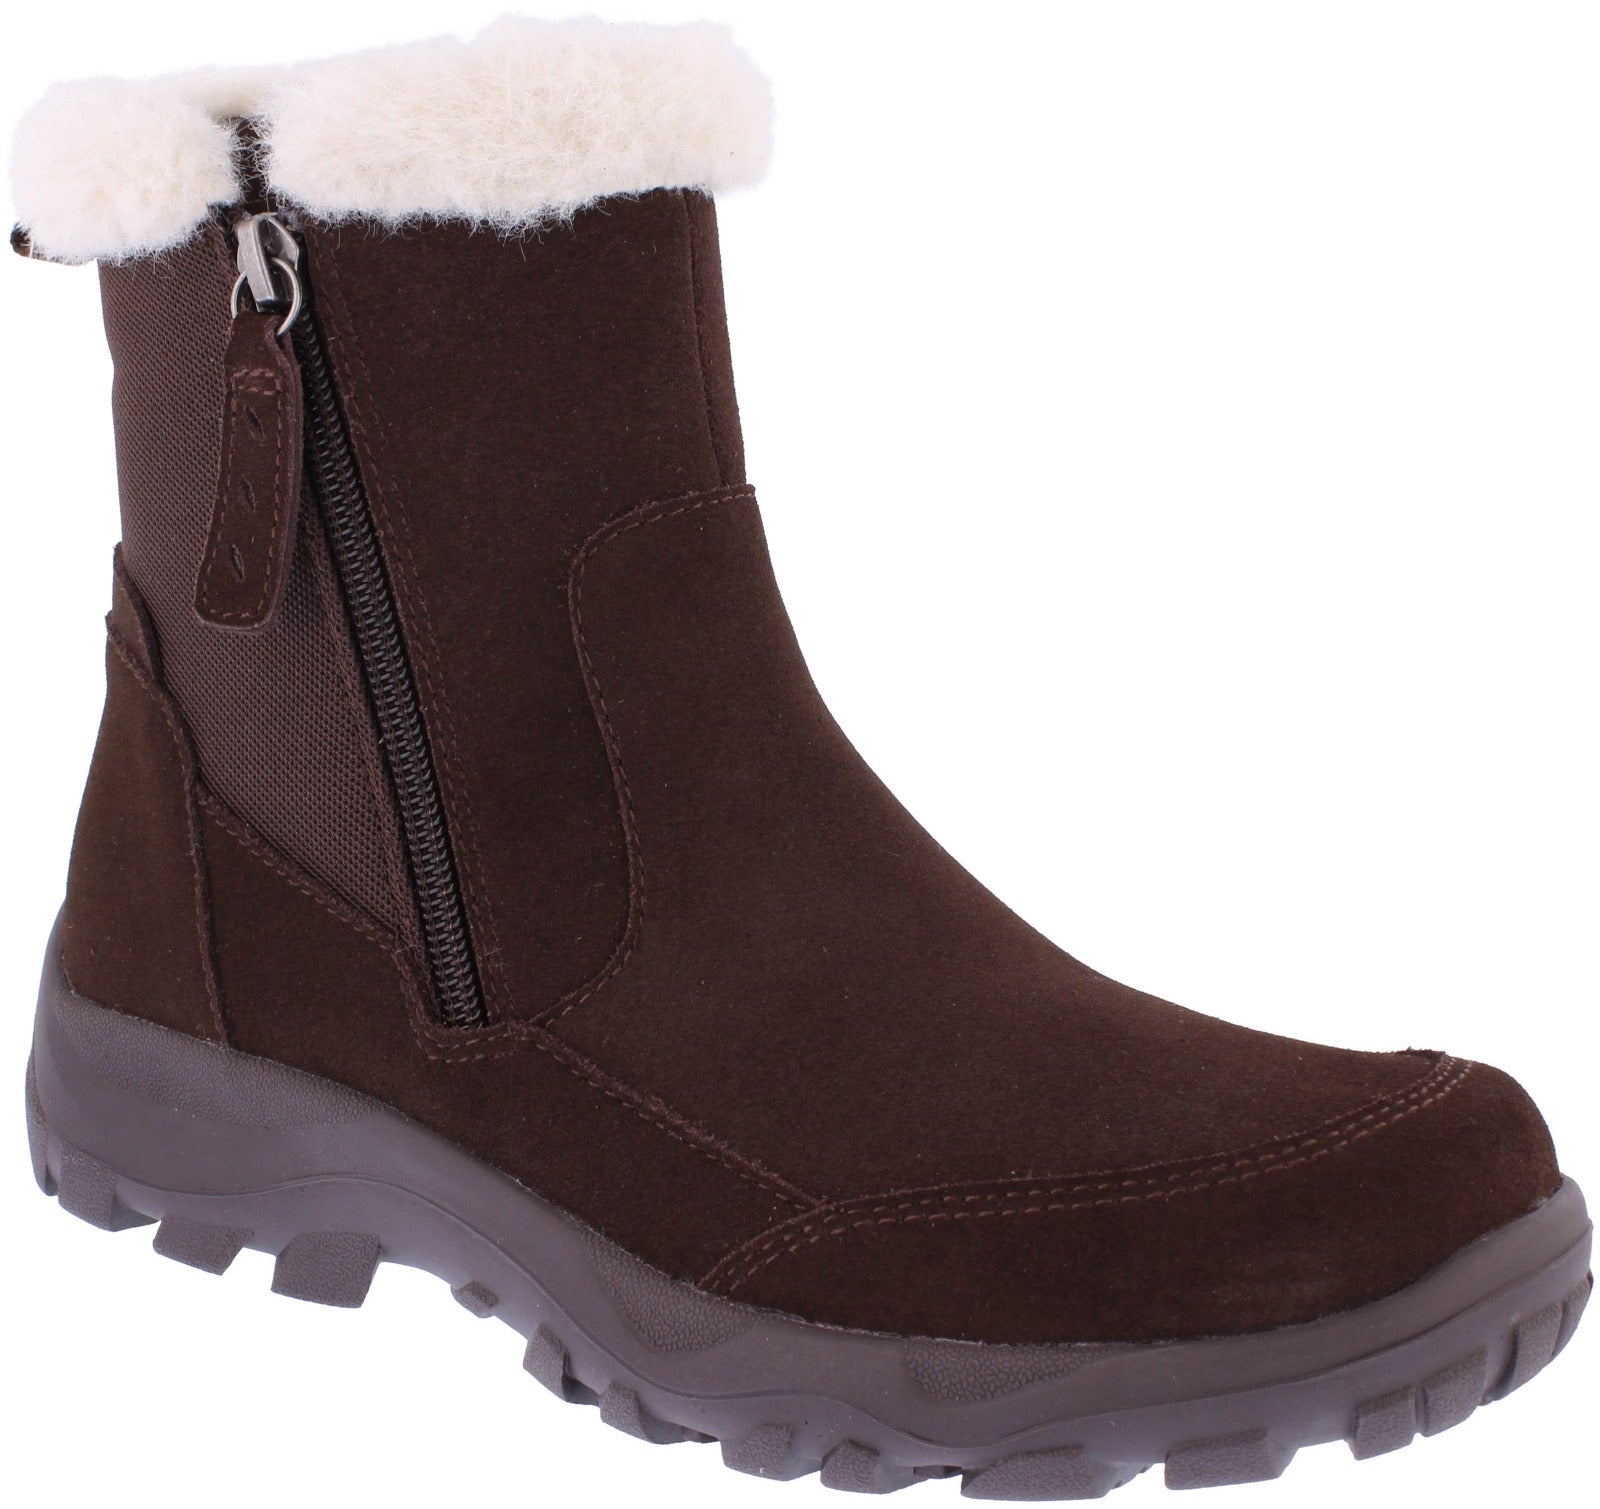 Free Spirit 40847 Adelyn Ladies Chestnut Brown Leather Arch Support Twin Zip Ankle Boots